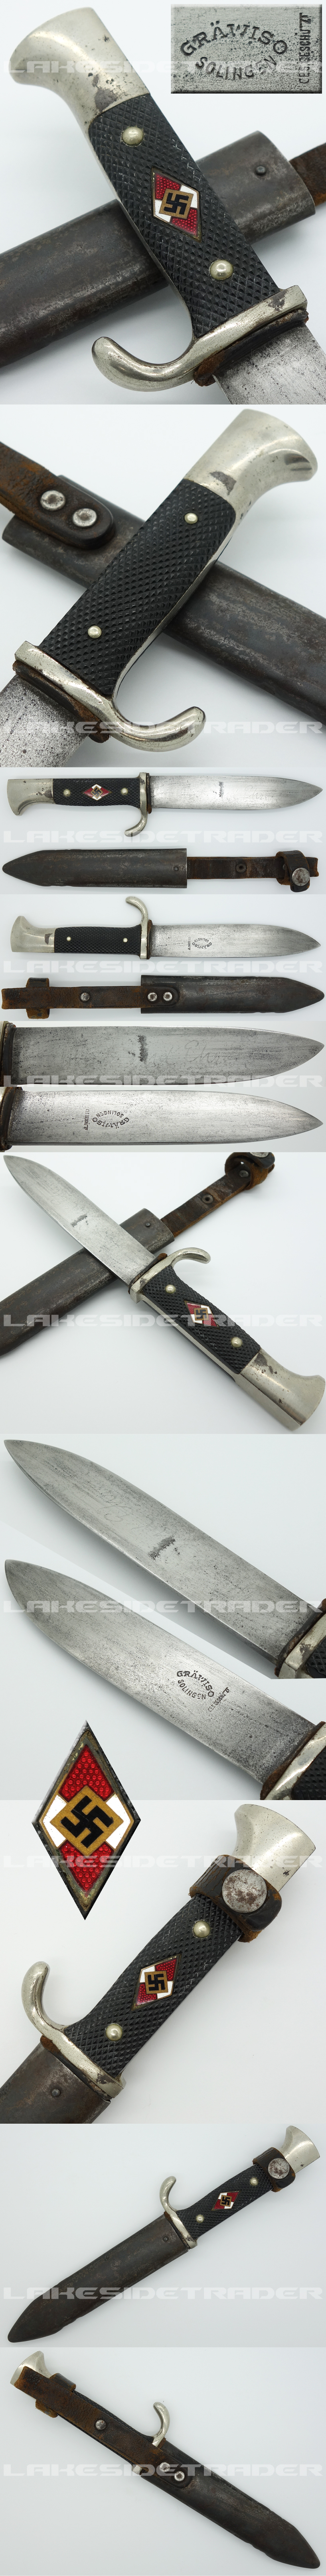 Early Hitler Youth Dagger by Grawiso